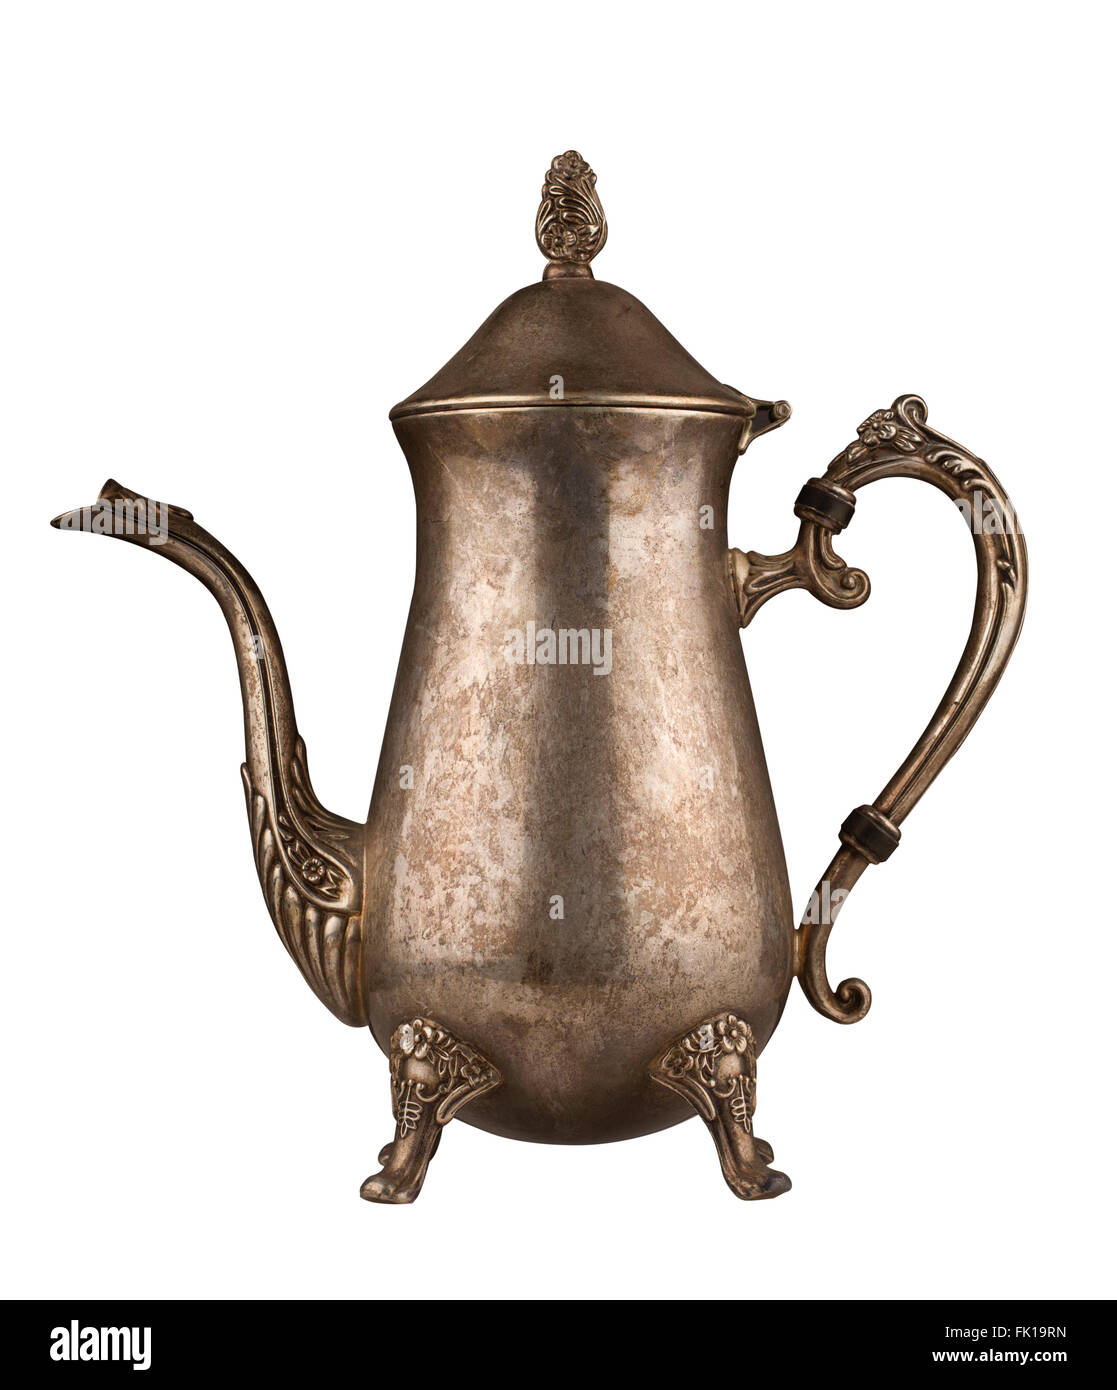 Silver vintage tea kettle with engravings isolated on white background Stock Photo